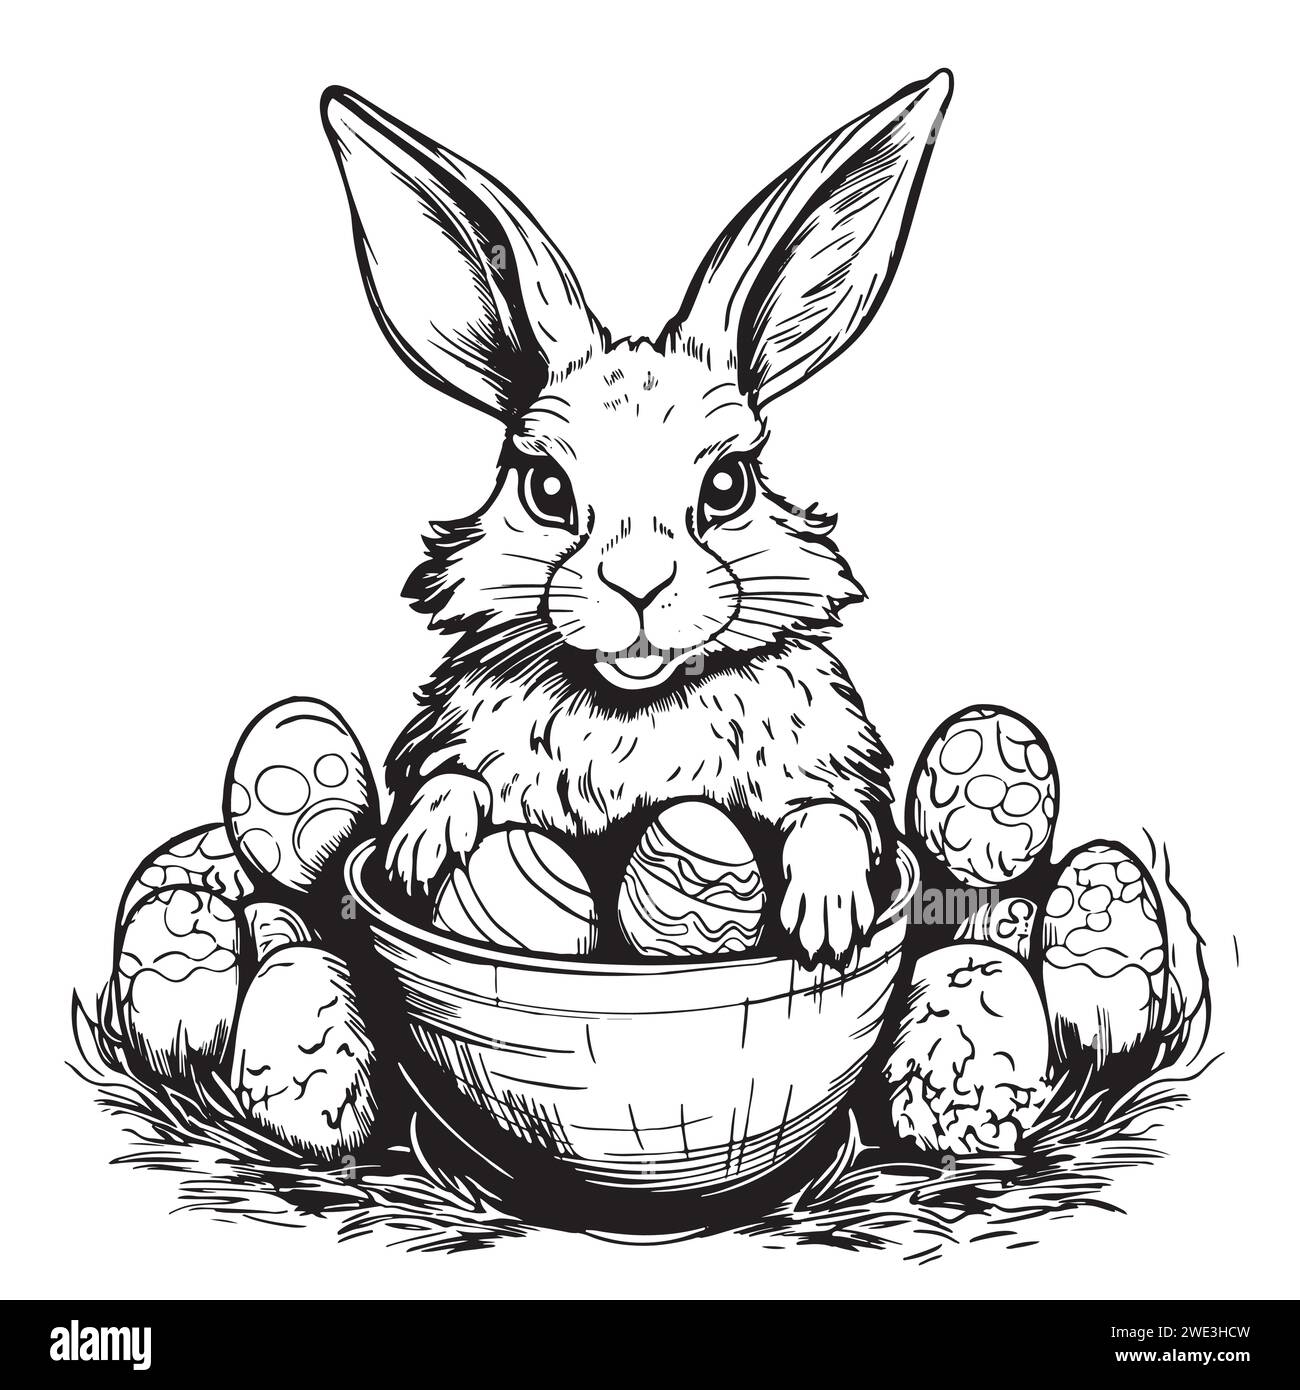 Easter bunny in flowers, eggs and spring flowers outline doodle black and white vector illustration for coloring pages or Easter cards design. Stock Vector